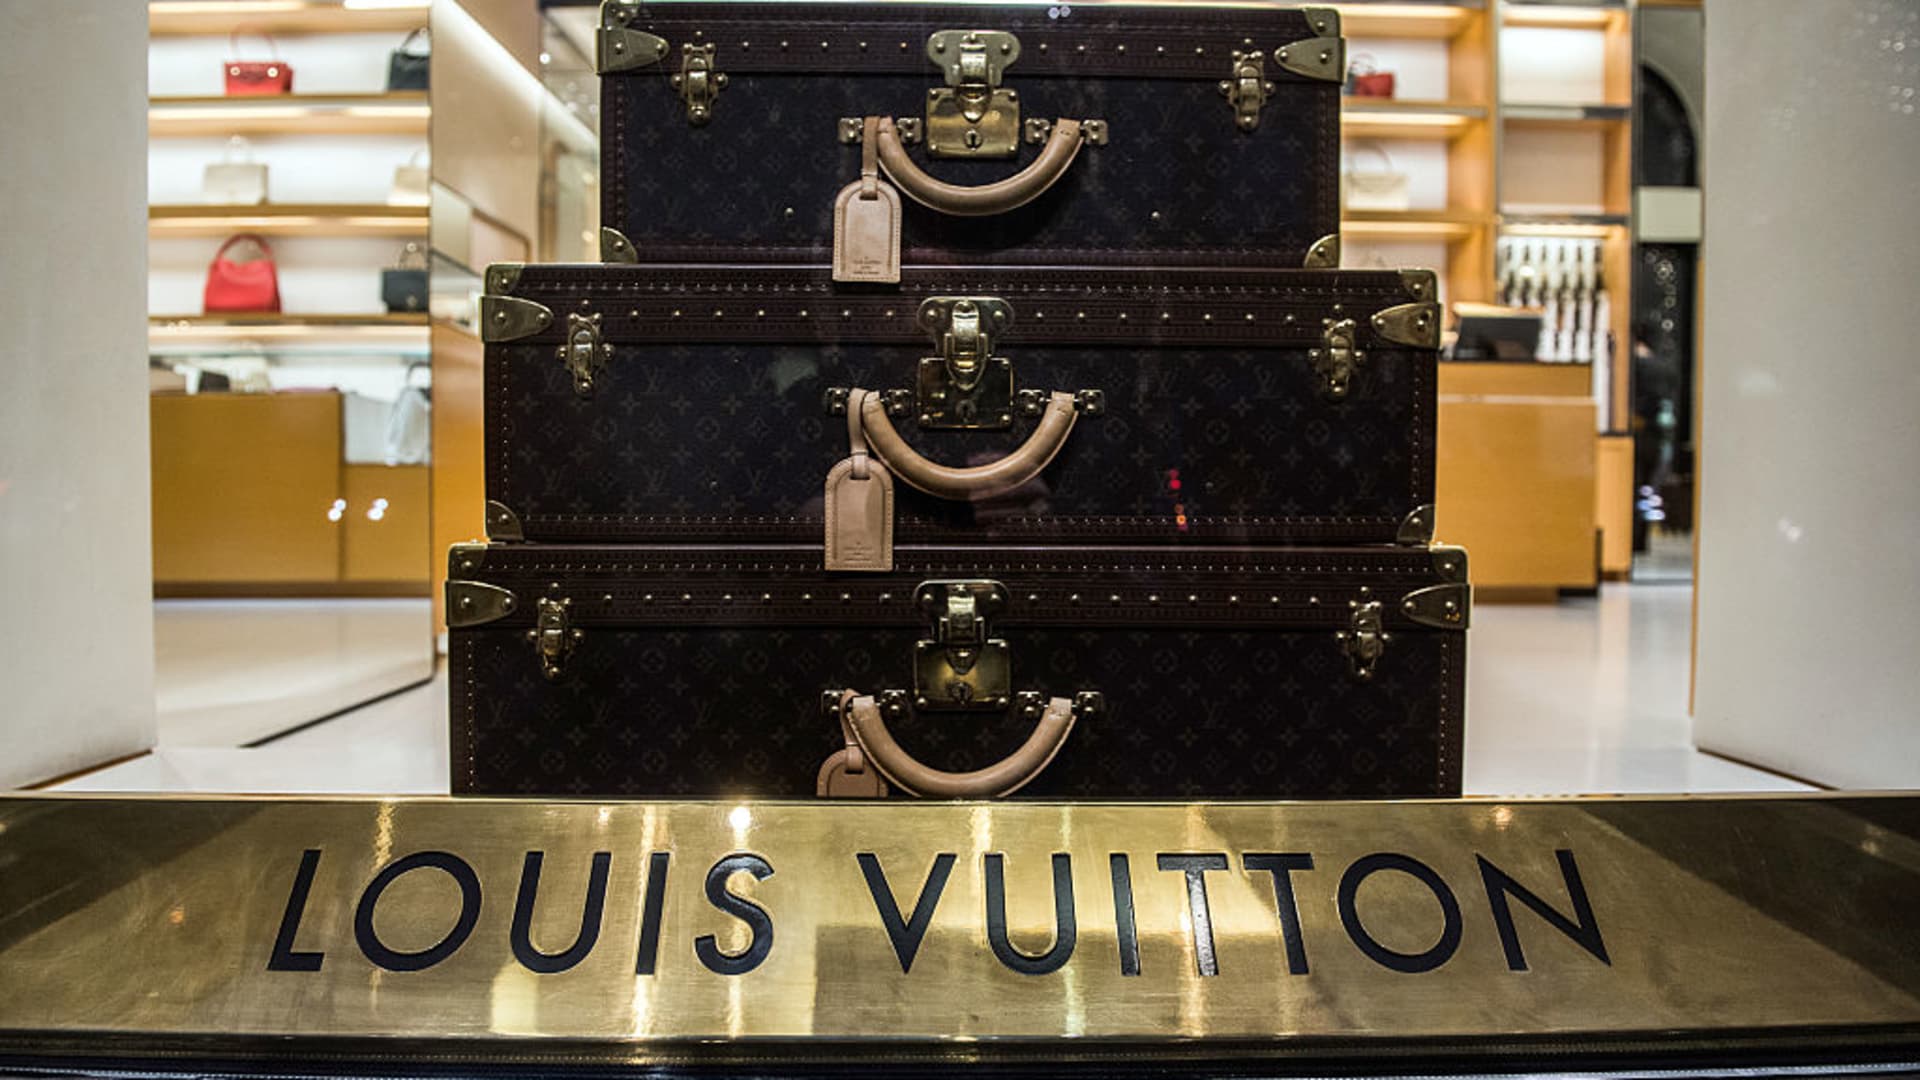 The History of Louis Vuitton and Information Guide - The Handbag Spa